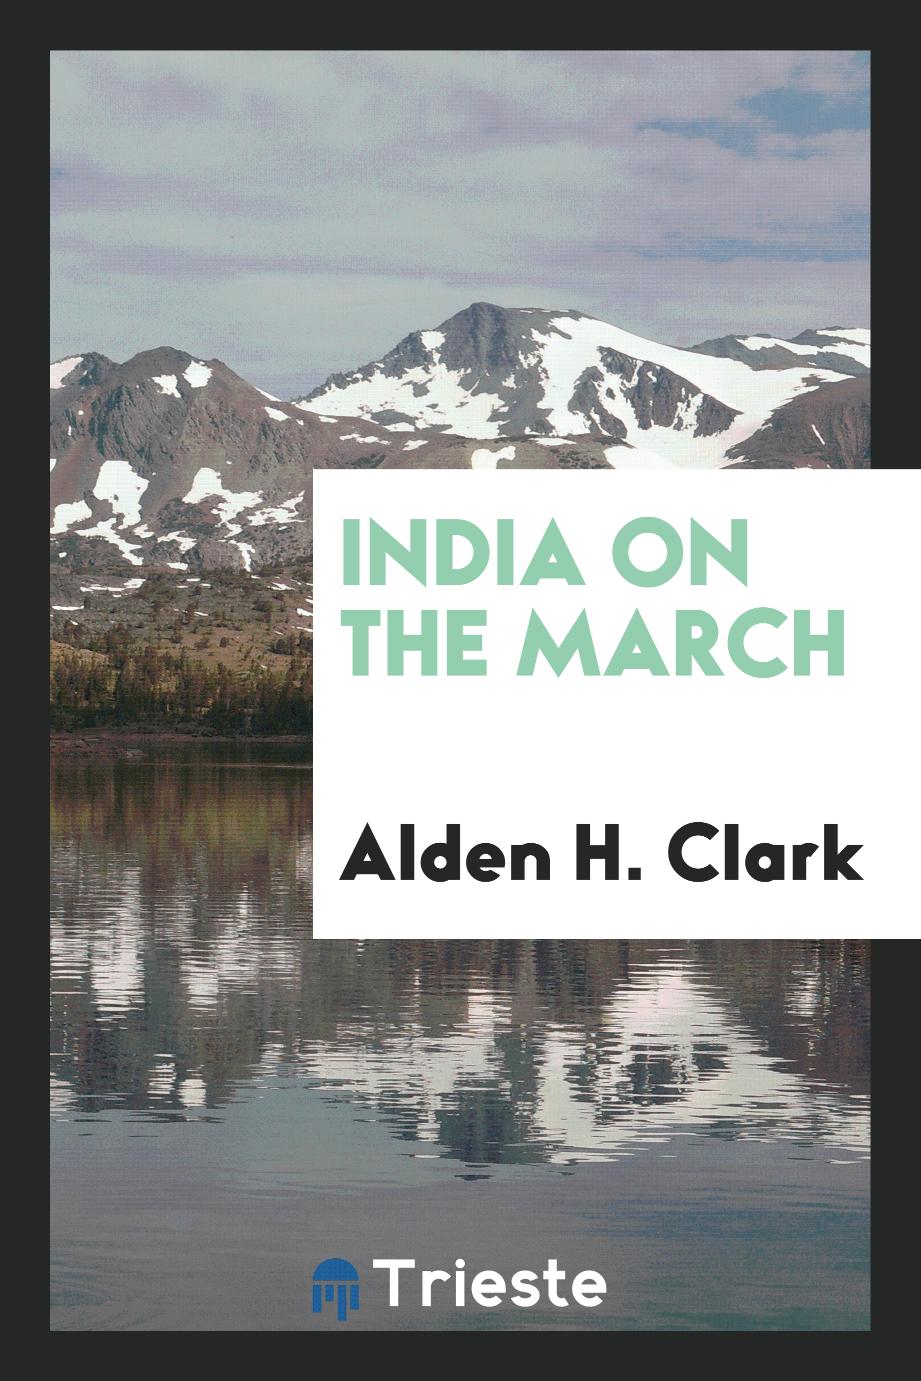 India on the march